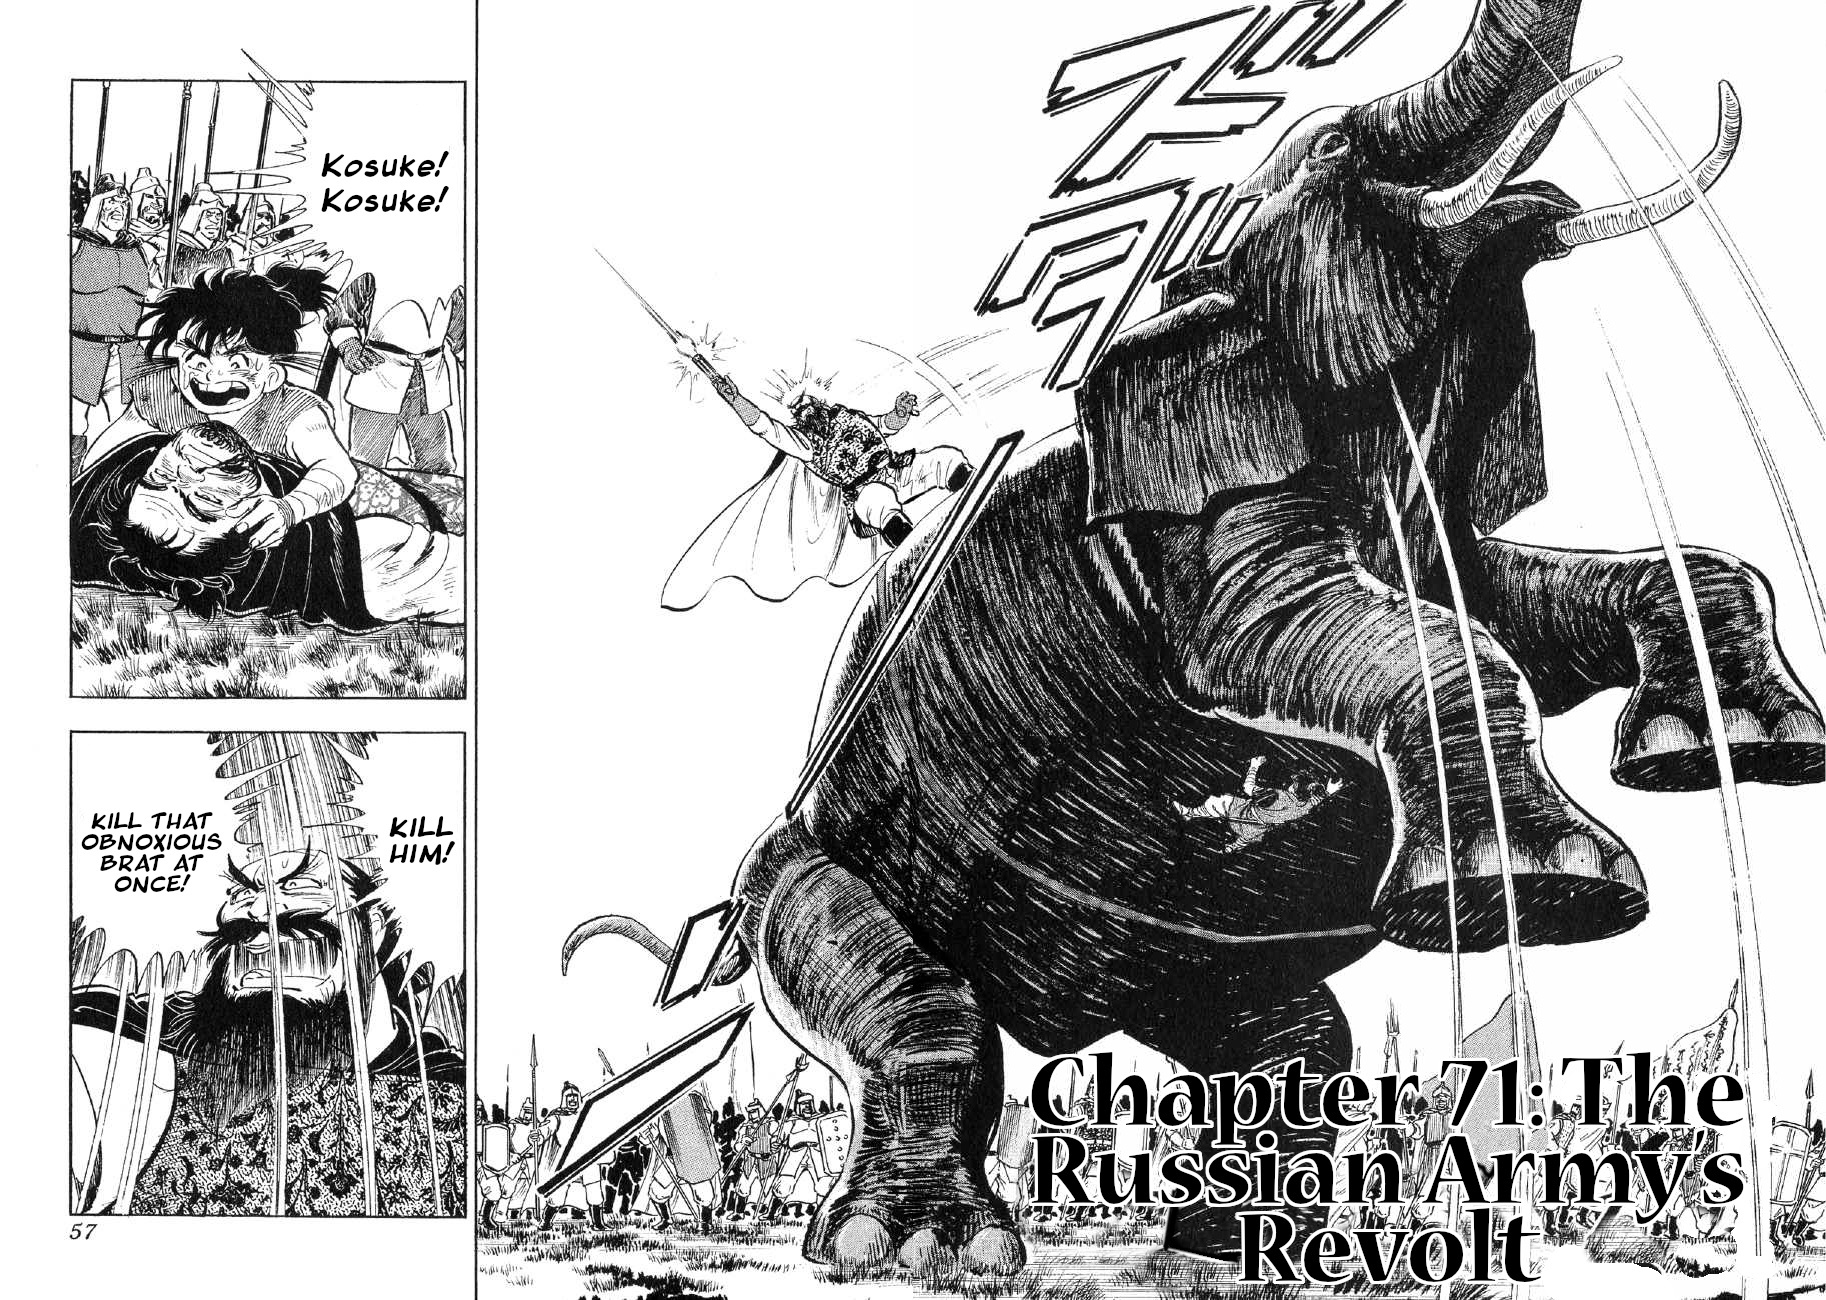 Yume Maboroshi No Gotoku Vol.10 Chapter 71: The Russian Army's Revolt - Picture 2